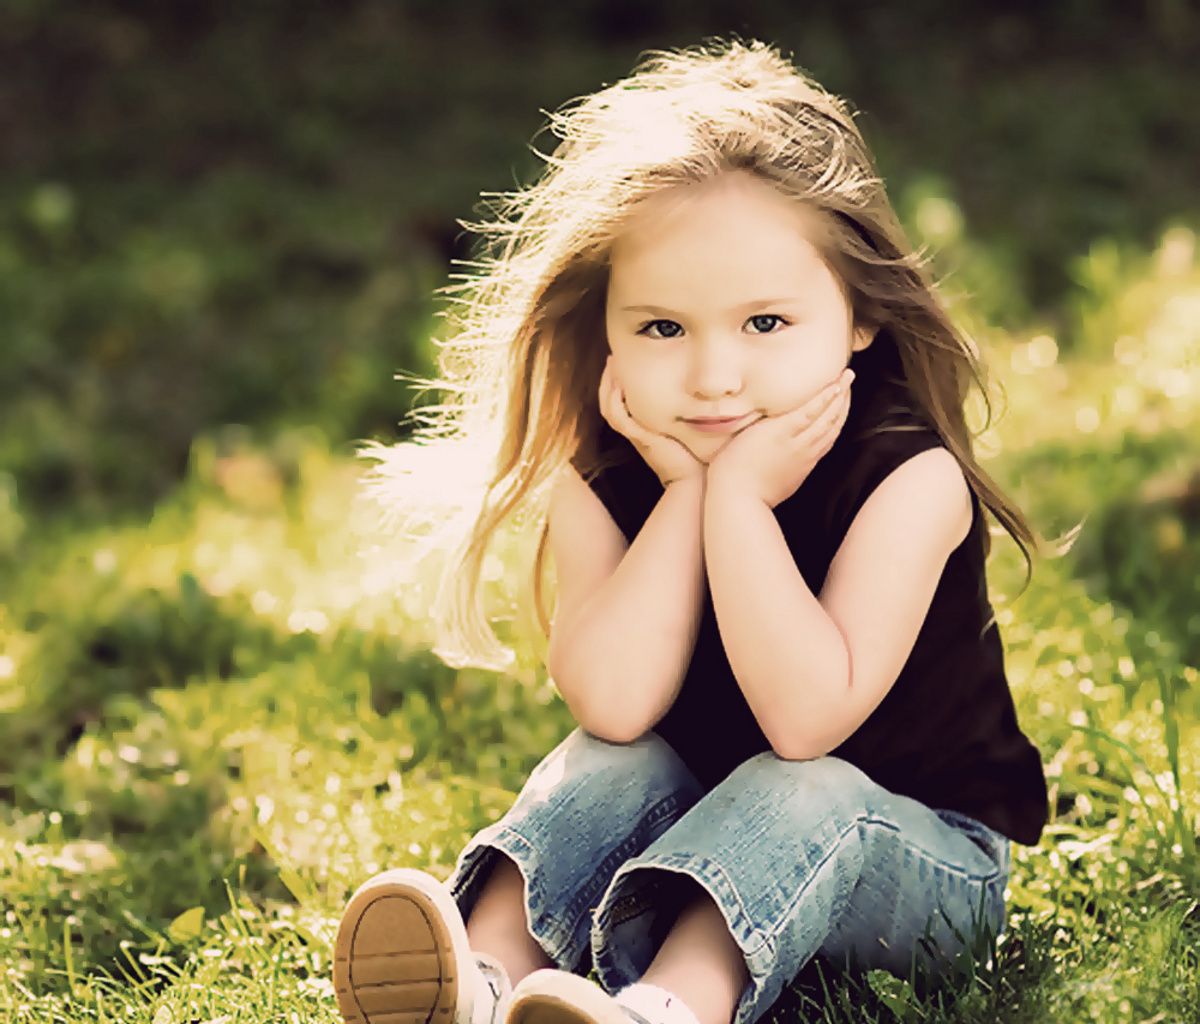 Cute Youngster HD Wallpapers - HD Images New